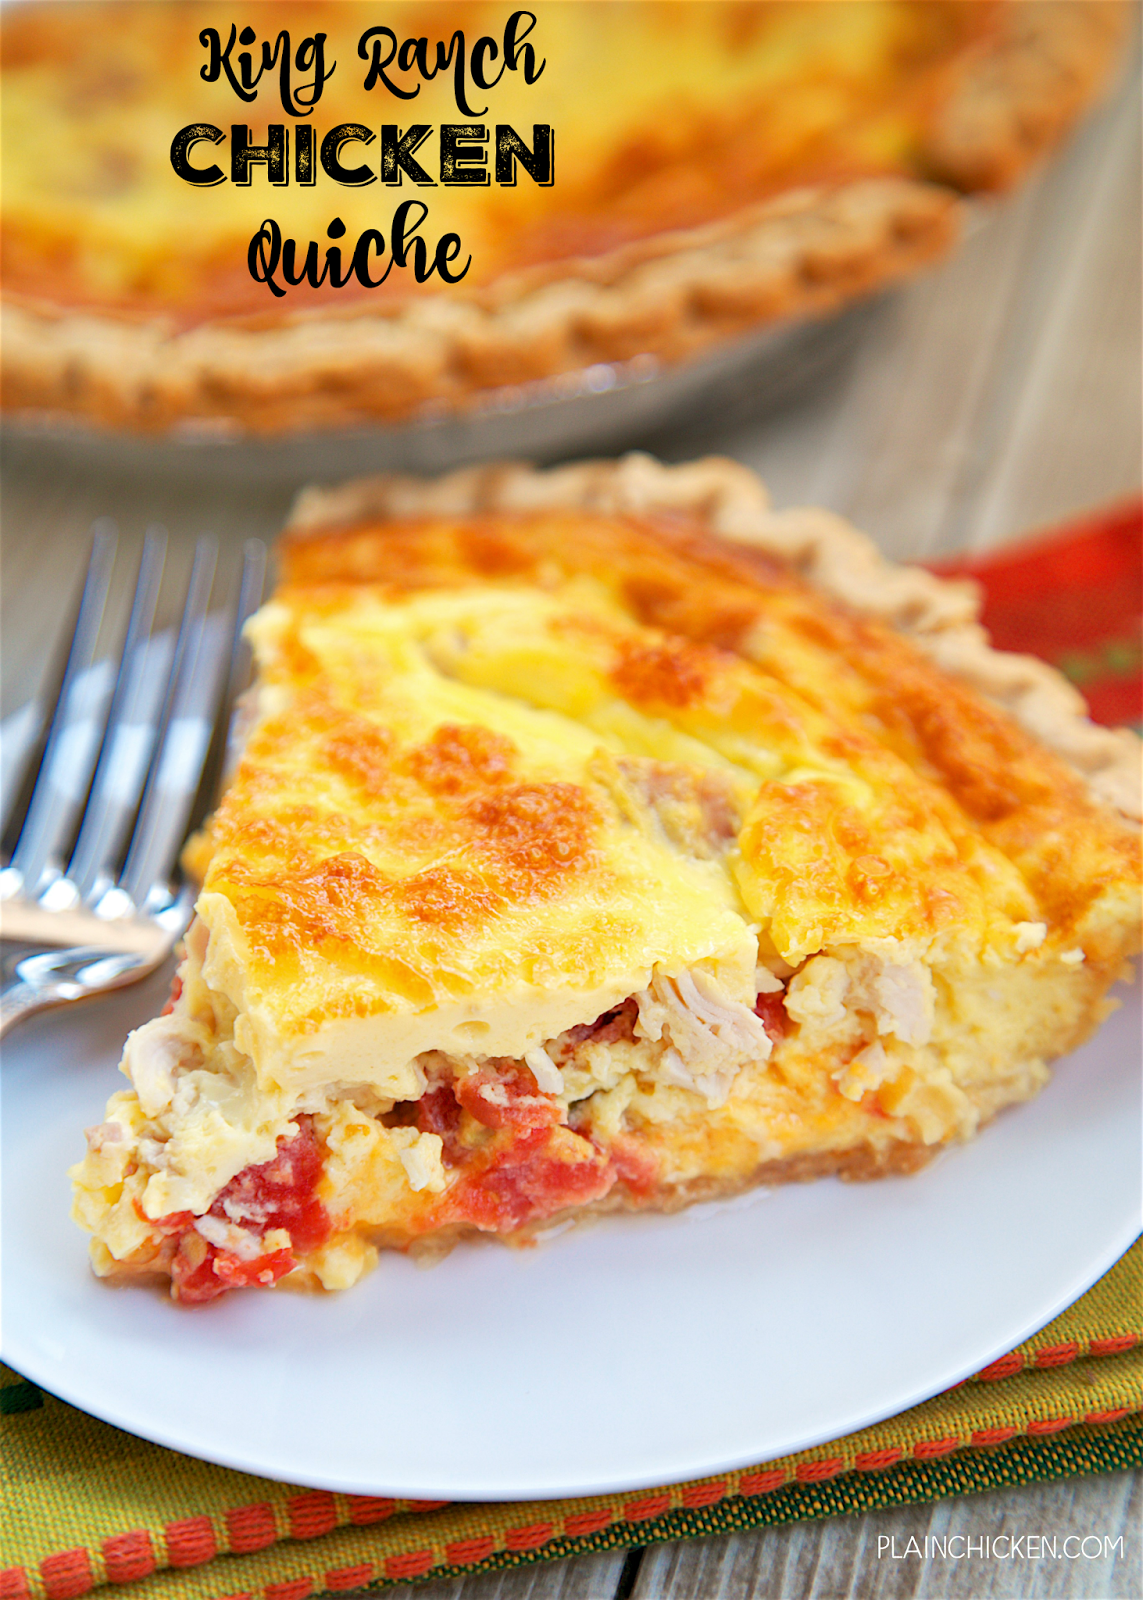 King Ranch Chicken Quiche - all the flavors of King Ranch Casserole in a quiche! Chicken, Rotel tomatoes, Velveeta, eggs and heavy cream baked in a pie crust. SOOOO good! We ate this for lunch and dinner the same day. You can make this ahead of time and freeze unbaked for later. This is always a hit in our house! Great Mexican quiche!